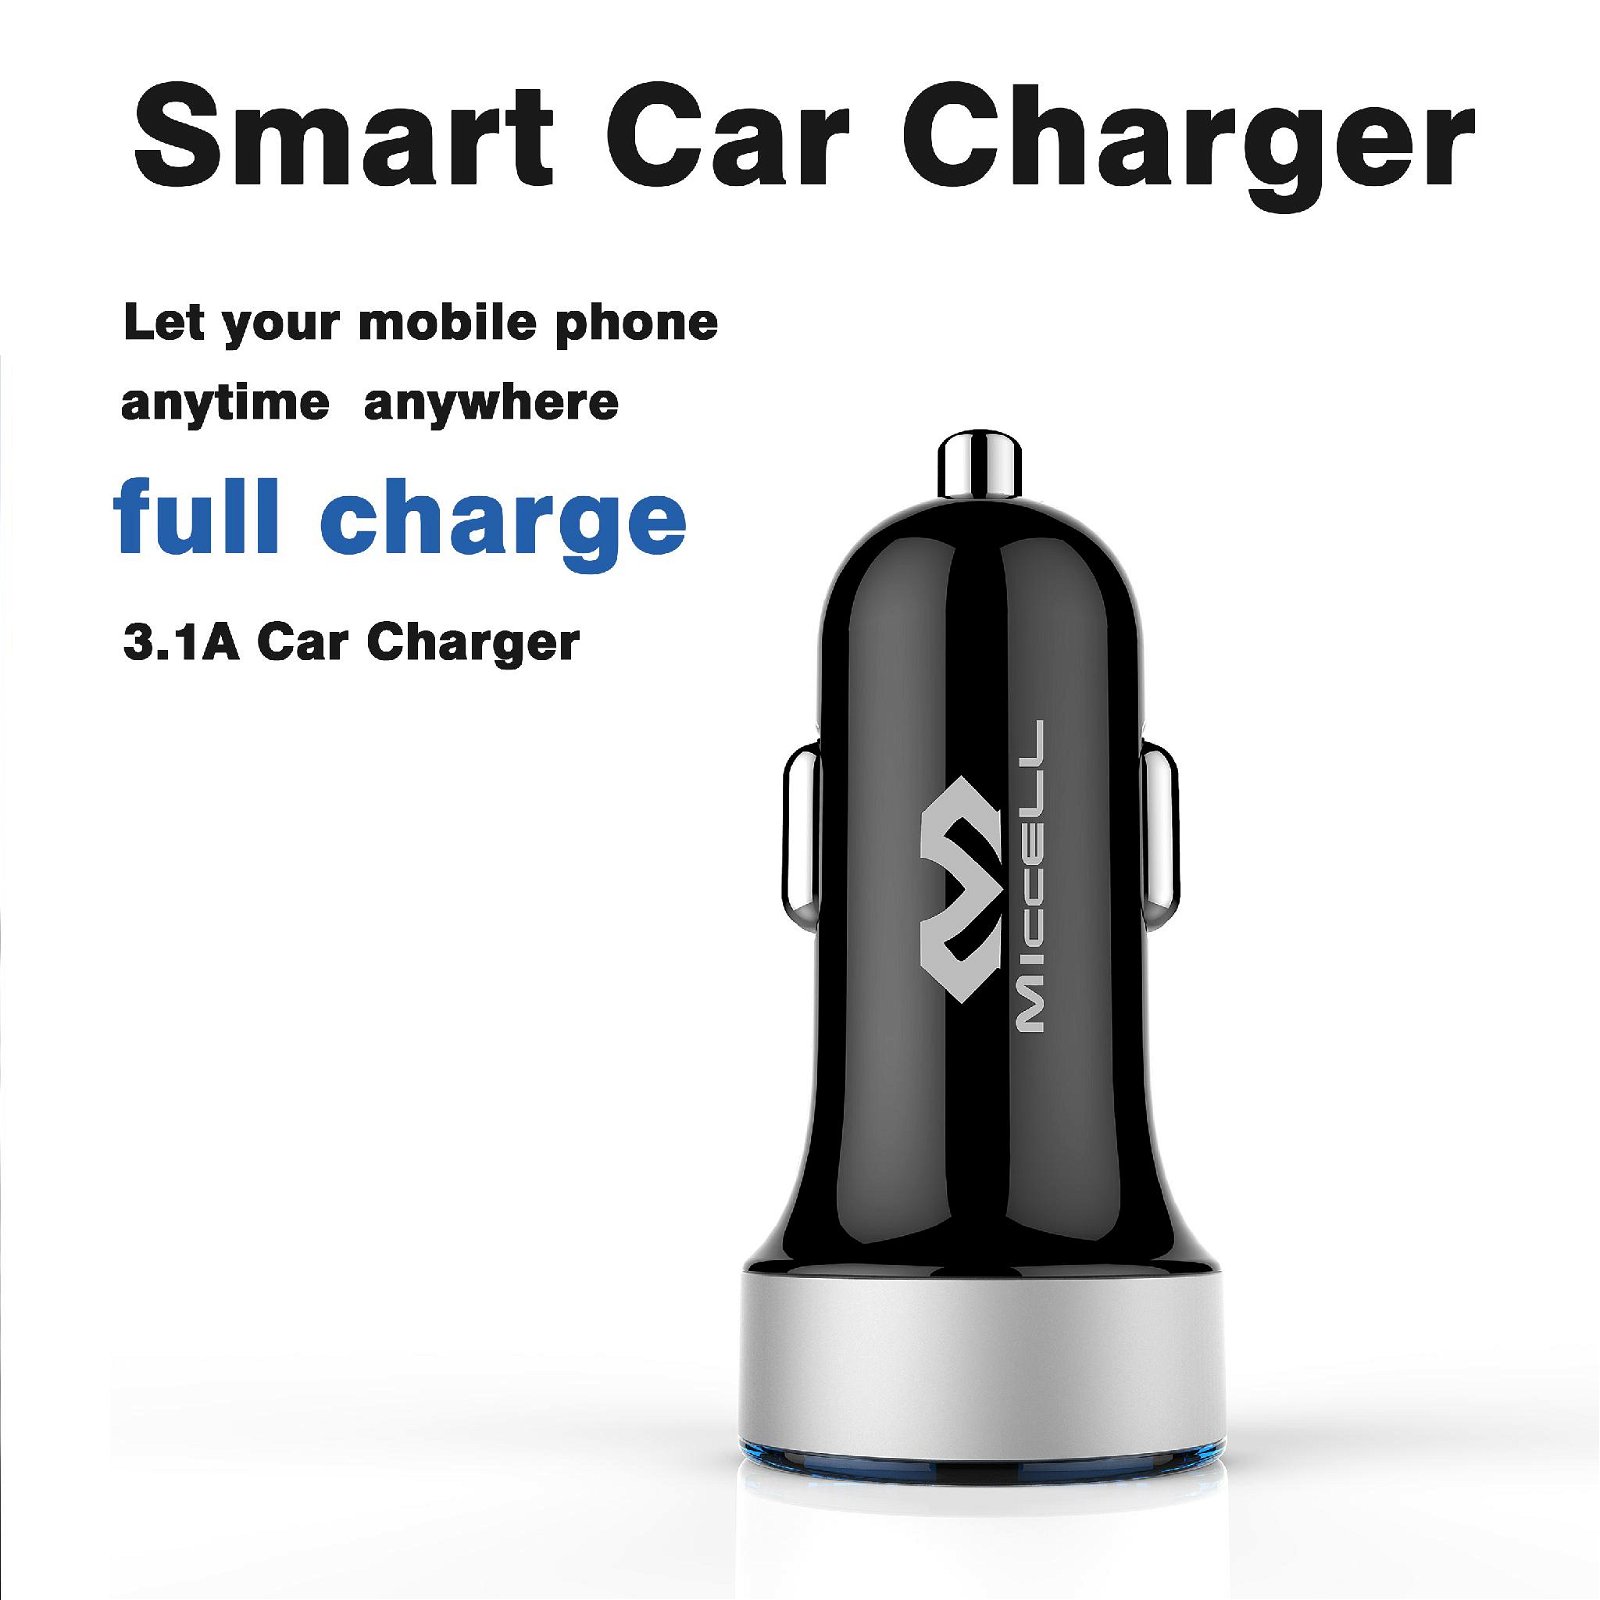 Veaqee Best sellers In Usa Car Charger Usb,Christmas Mini Usb Car Charger,Electr 5